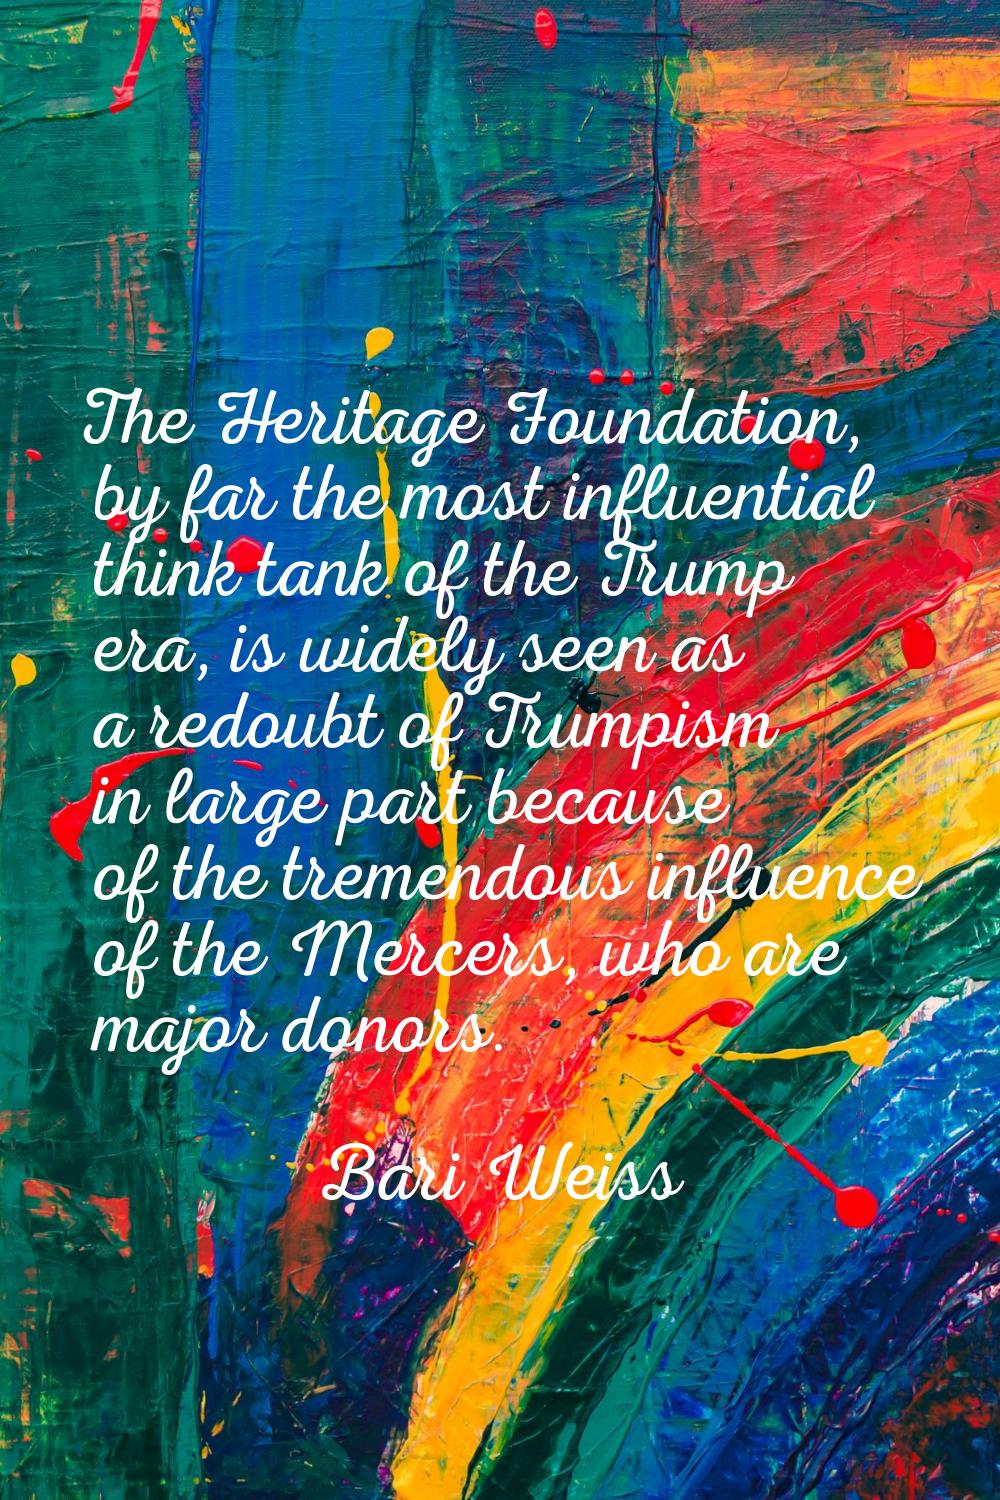 The Heritage Foundation, by far the most influential think tank of the Trump era, is widely seen as